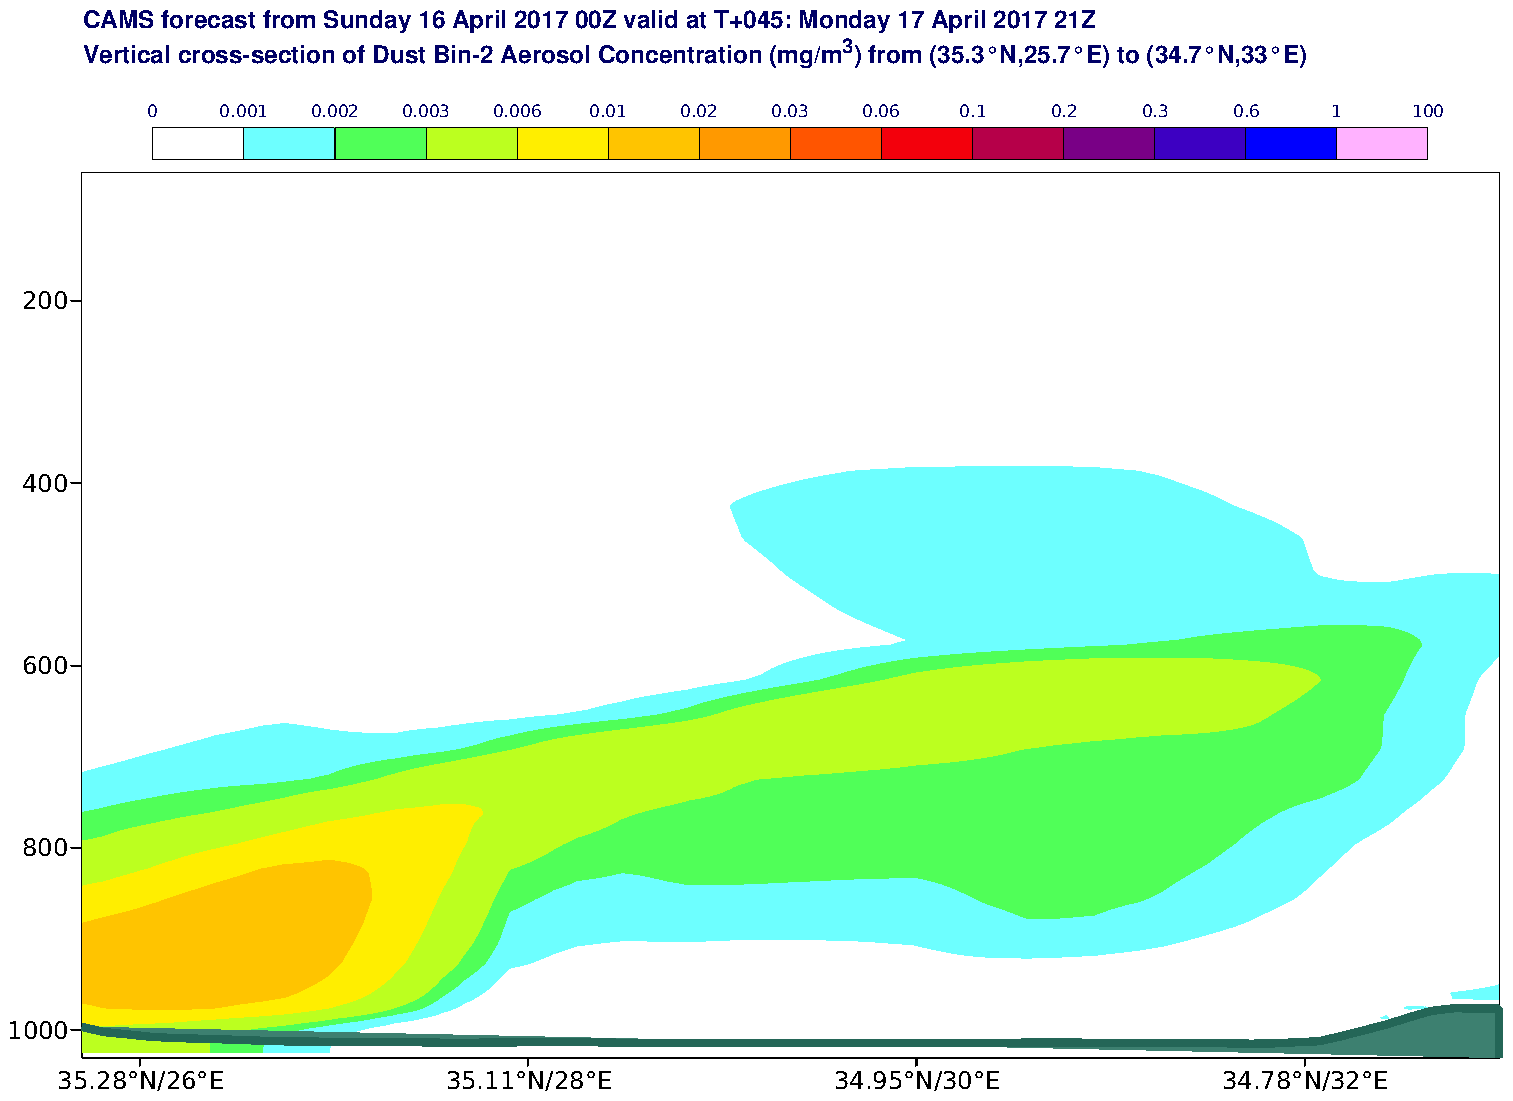 Vertical cross-section of Dust Bin-2 Aerosol Concentration (mg/m3) valid at T45 - 2017-04-17 21:00